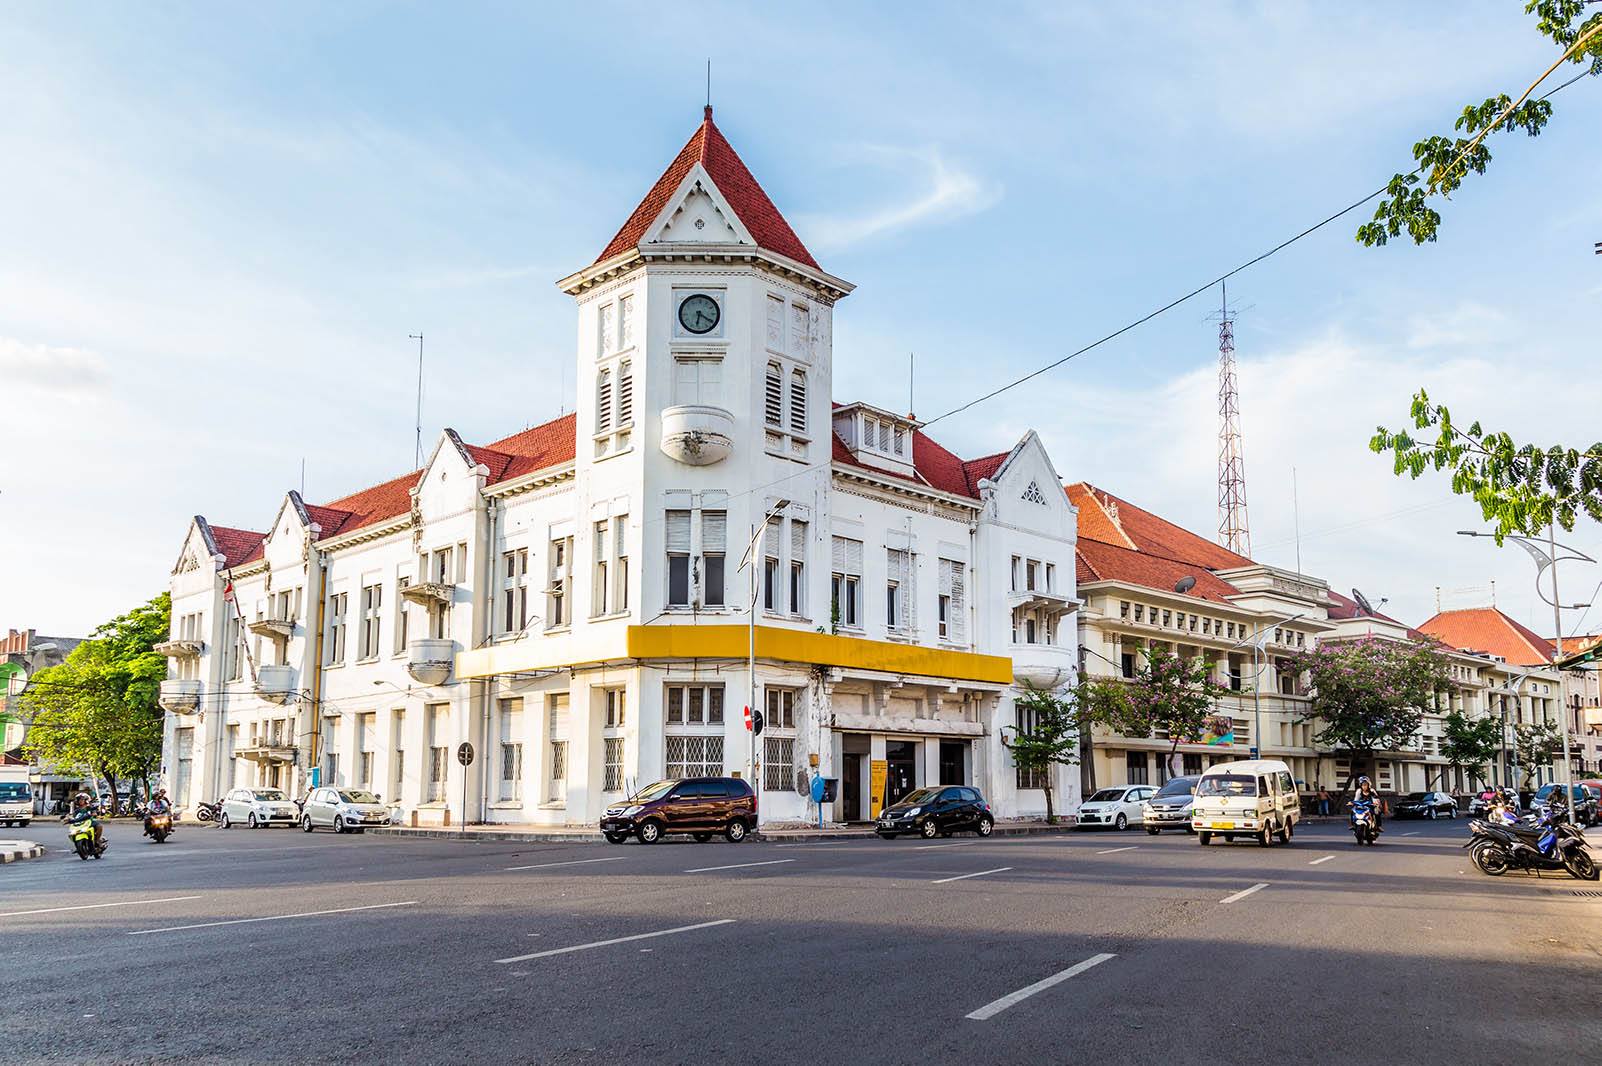 Surabaya’s mix of Dutch colonial architecture, celebratory monuments and its melting pot of neighbourhoods, from Chinatown to the Arab Quarter